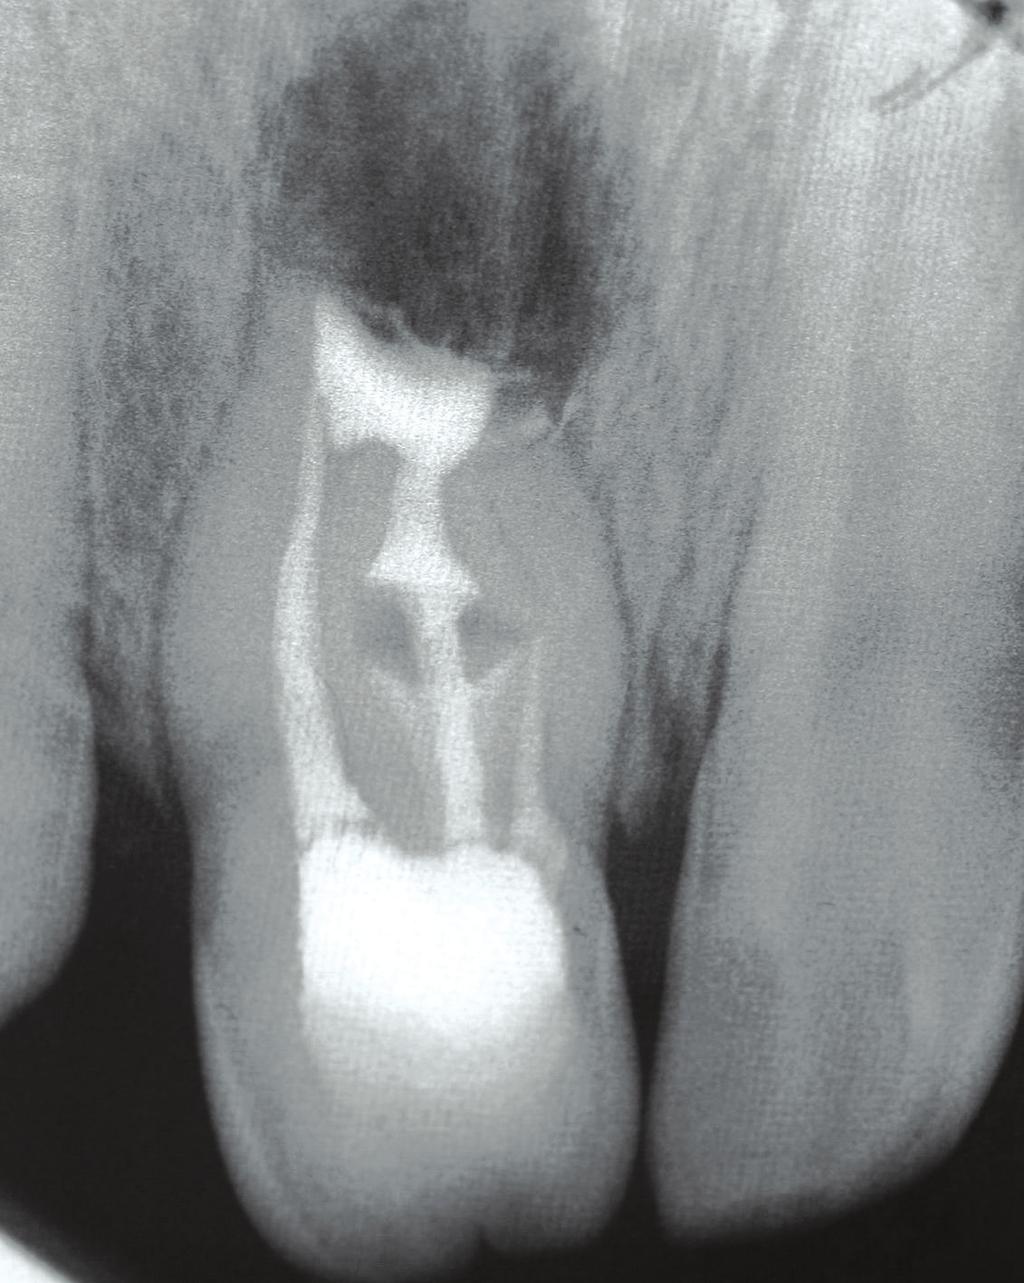 At the 2-year follow-up, the radiograph examination showed that the tooth exhibited no clinical symptoms, and there was